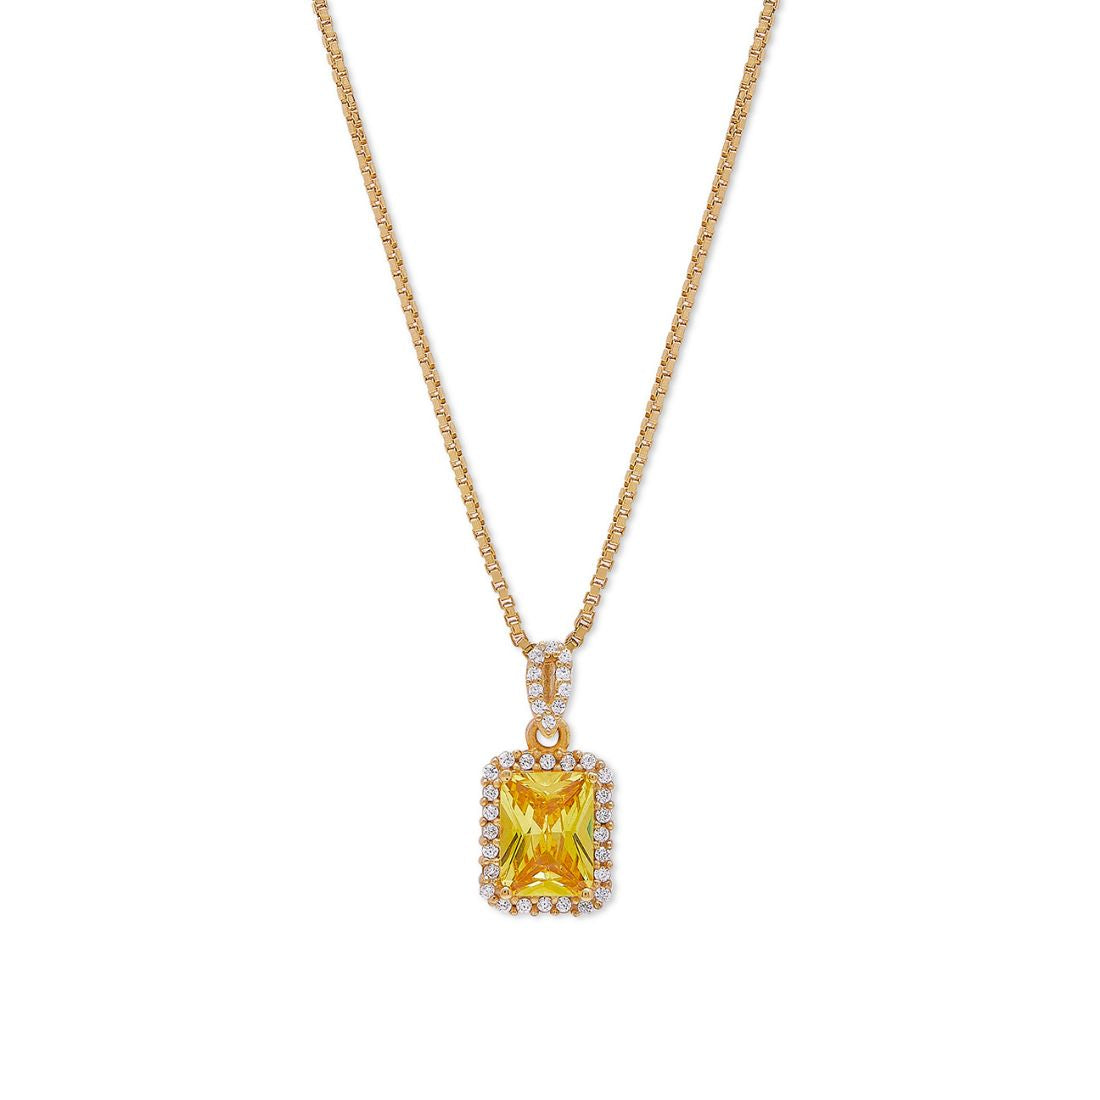 Golden Radiance 925 Sterling Silver Gold-Plated CZ Pendant with Chain